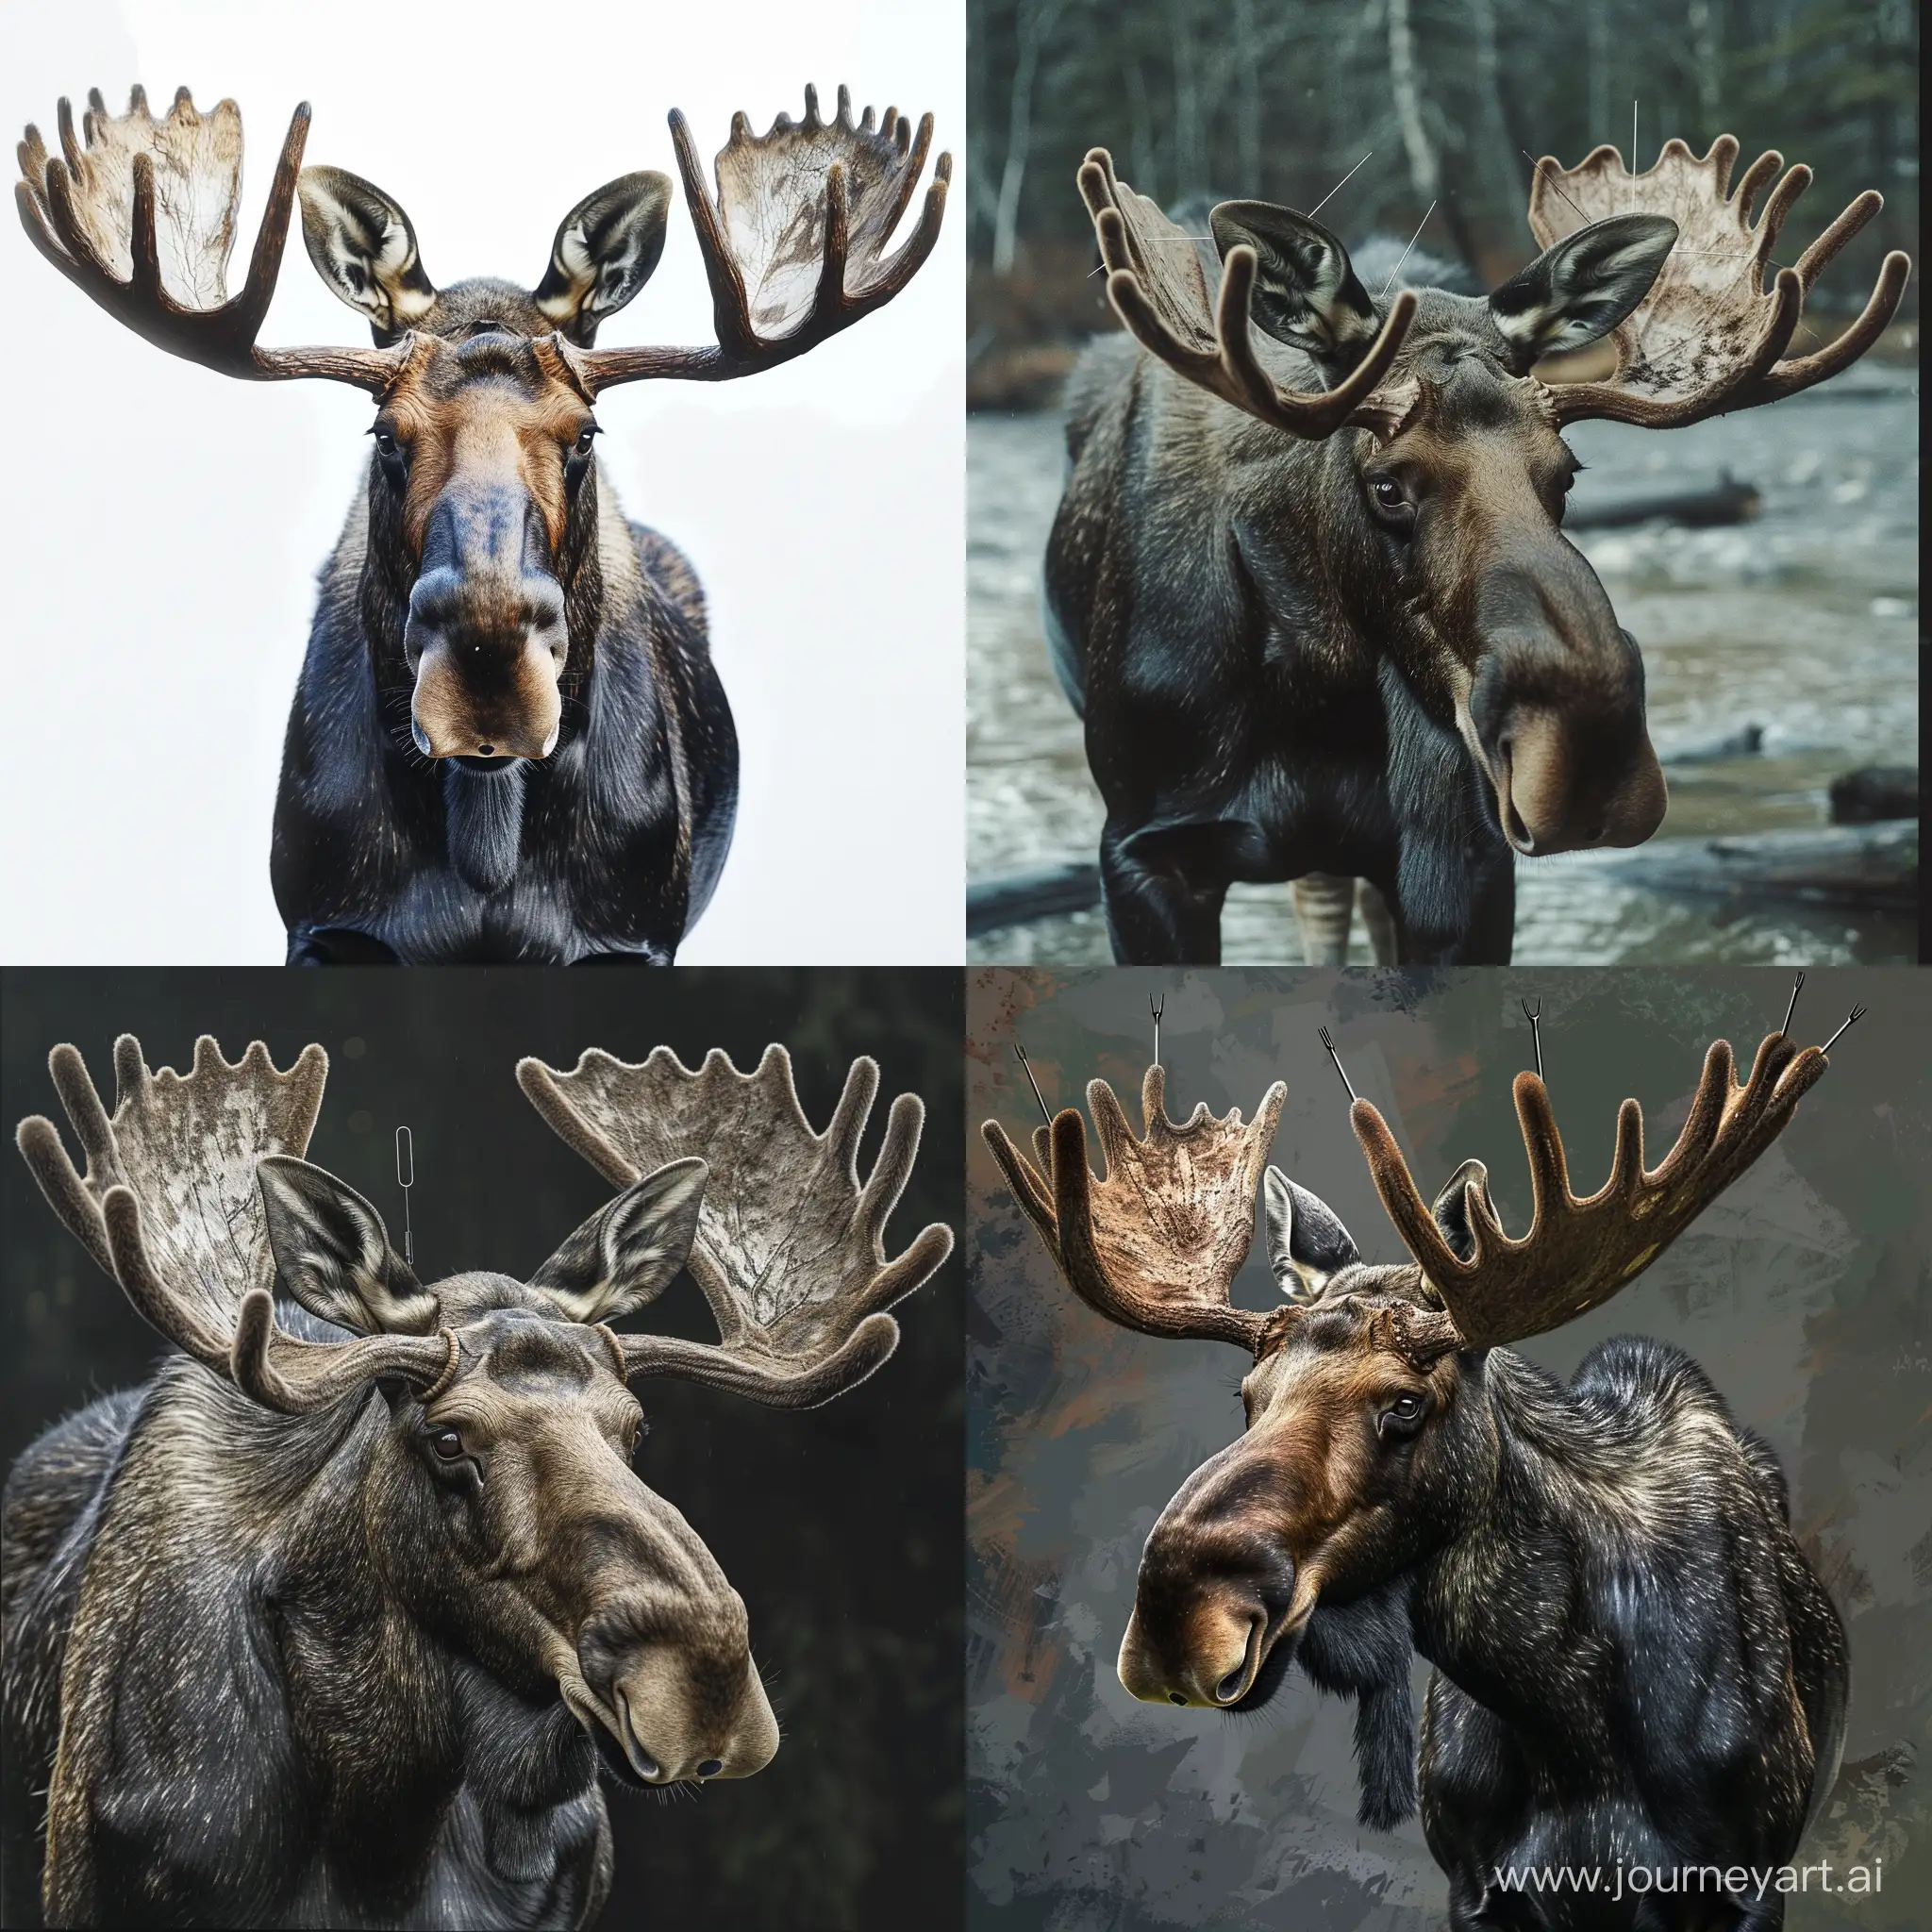 Quirky-Moose-with-Antennae-Instead-of-Horns